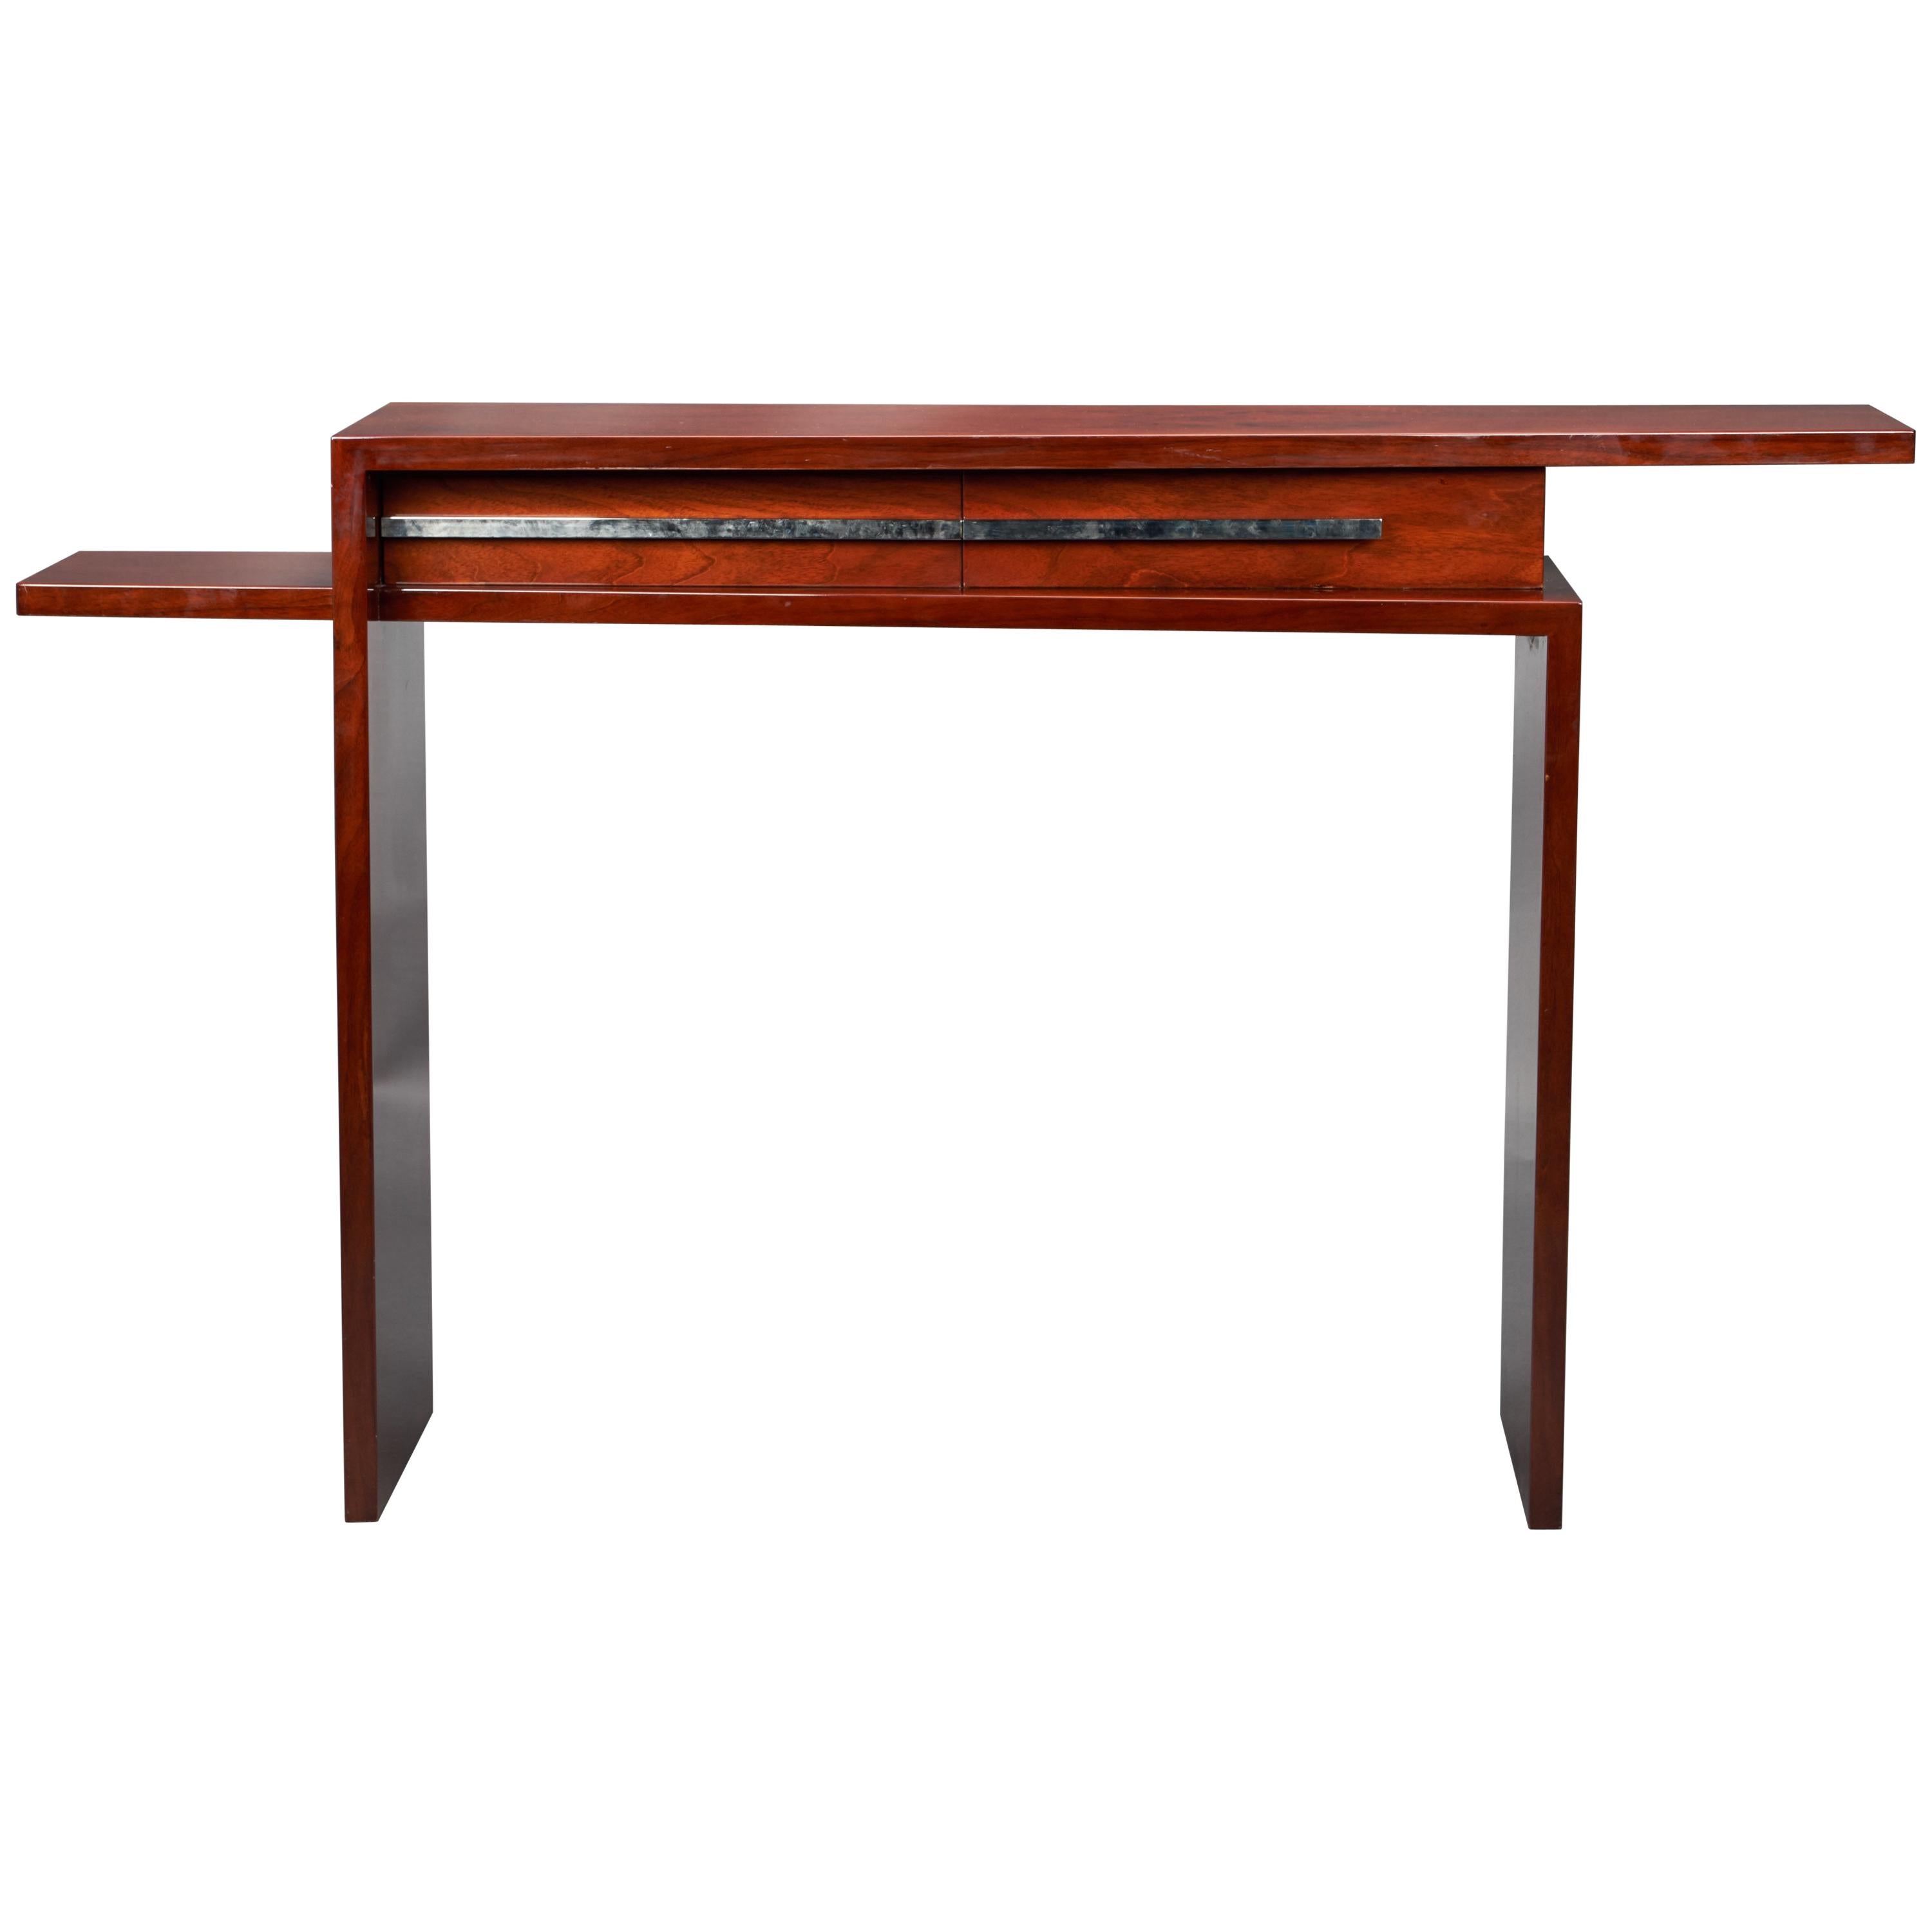  Midcentury French Console in Walnut